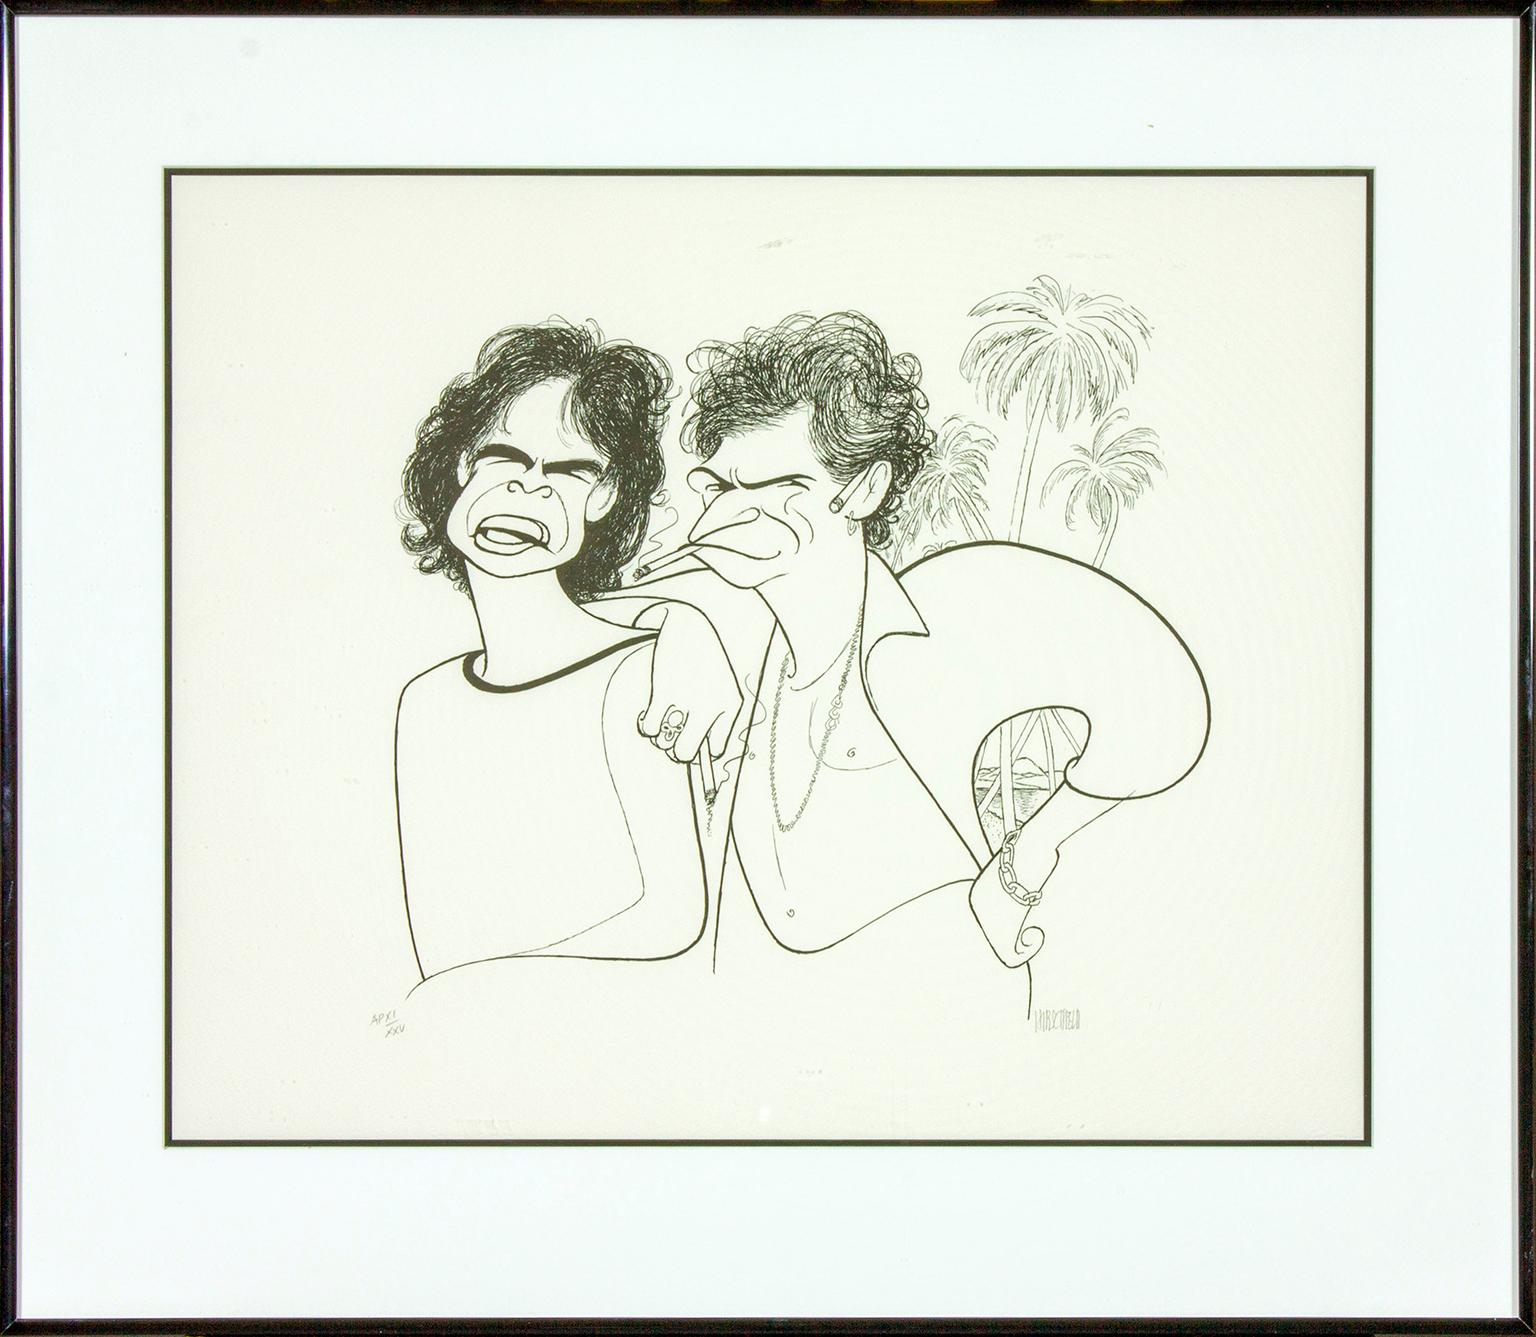 "Mick Jagger and Keith Richards" original signed lithograph by Al Hirschfeld. 